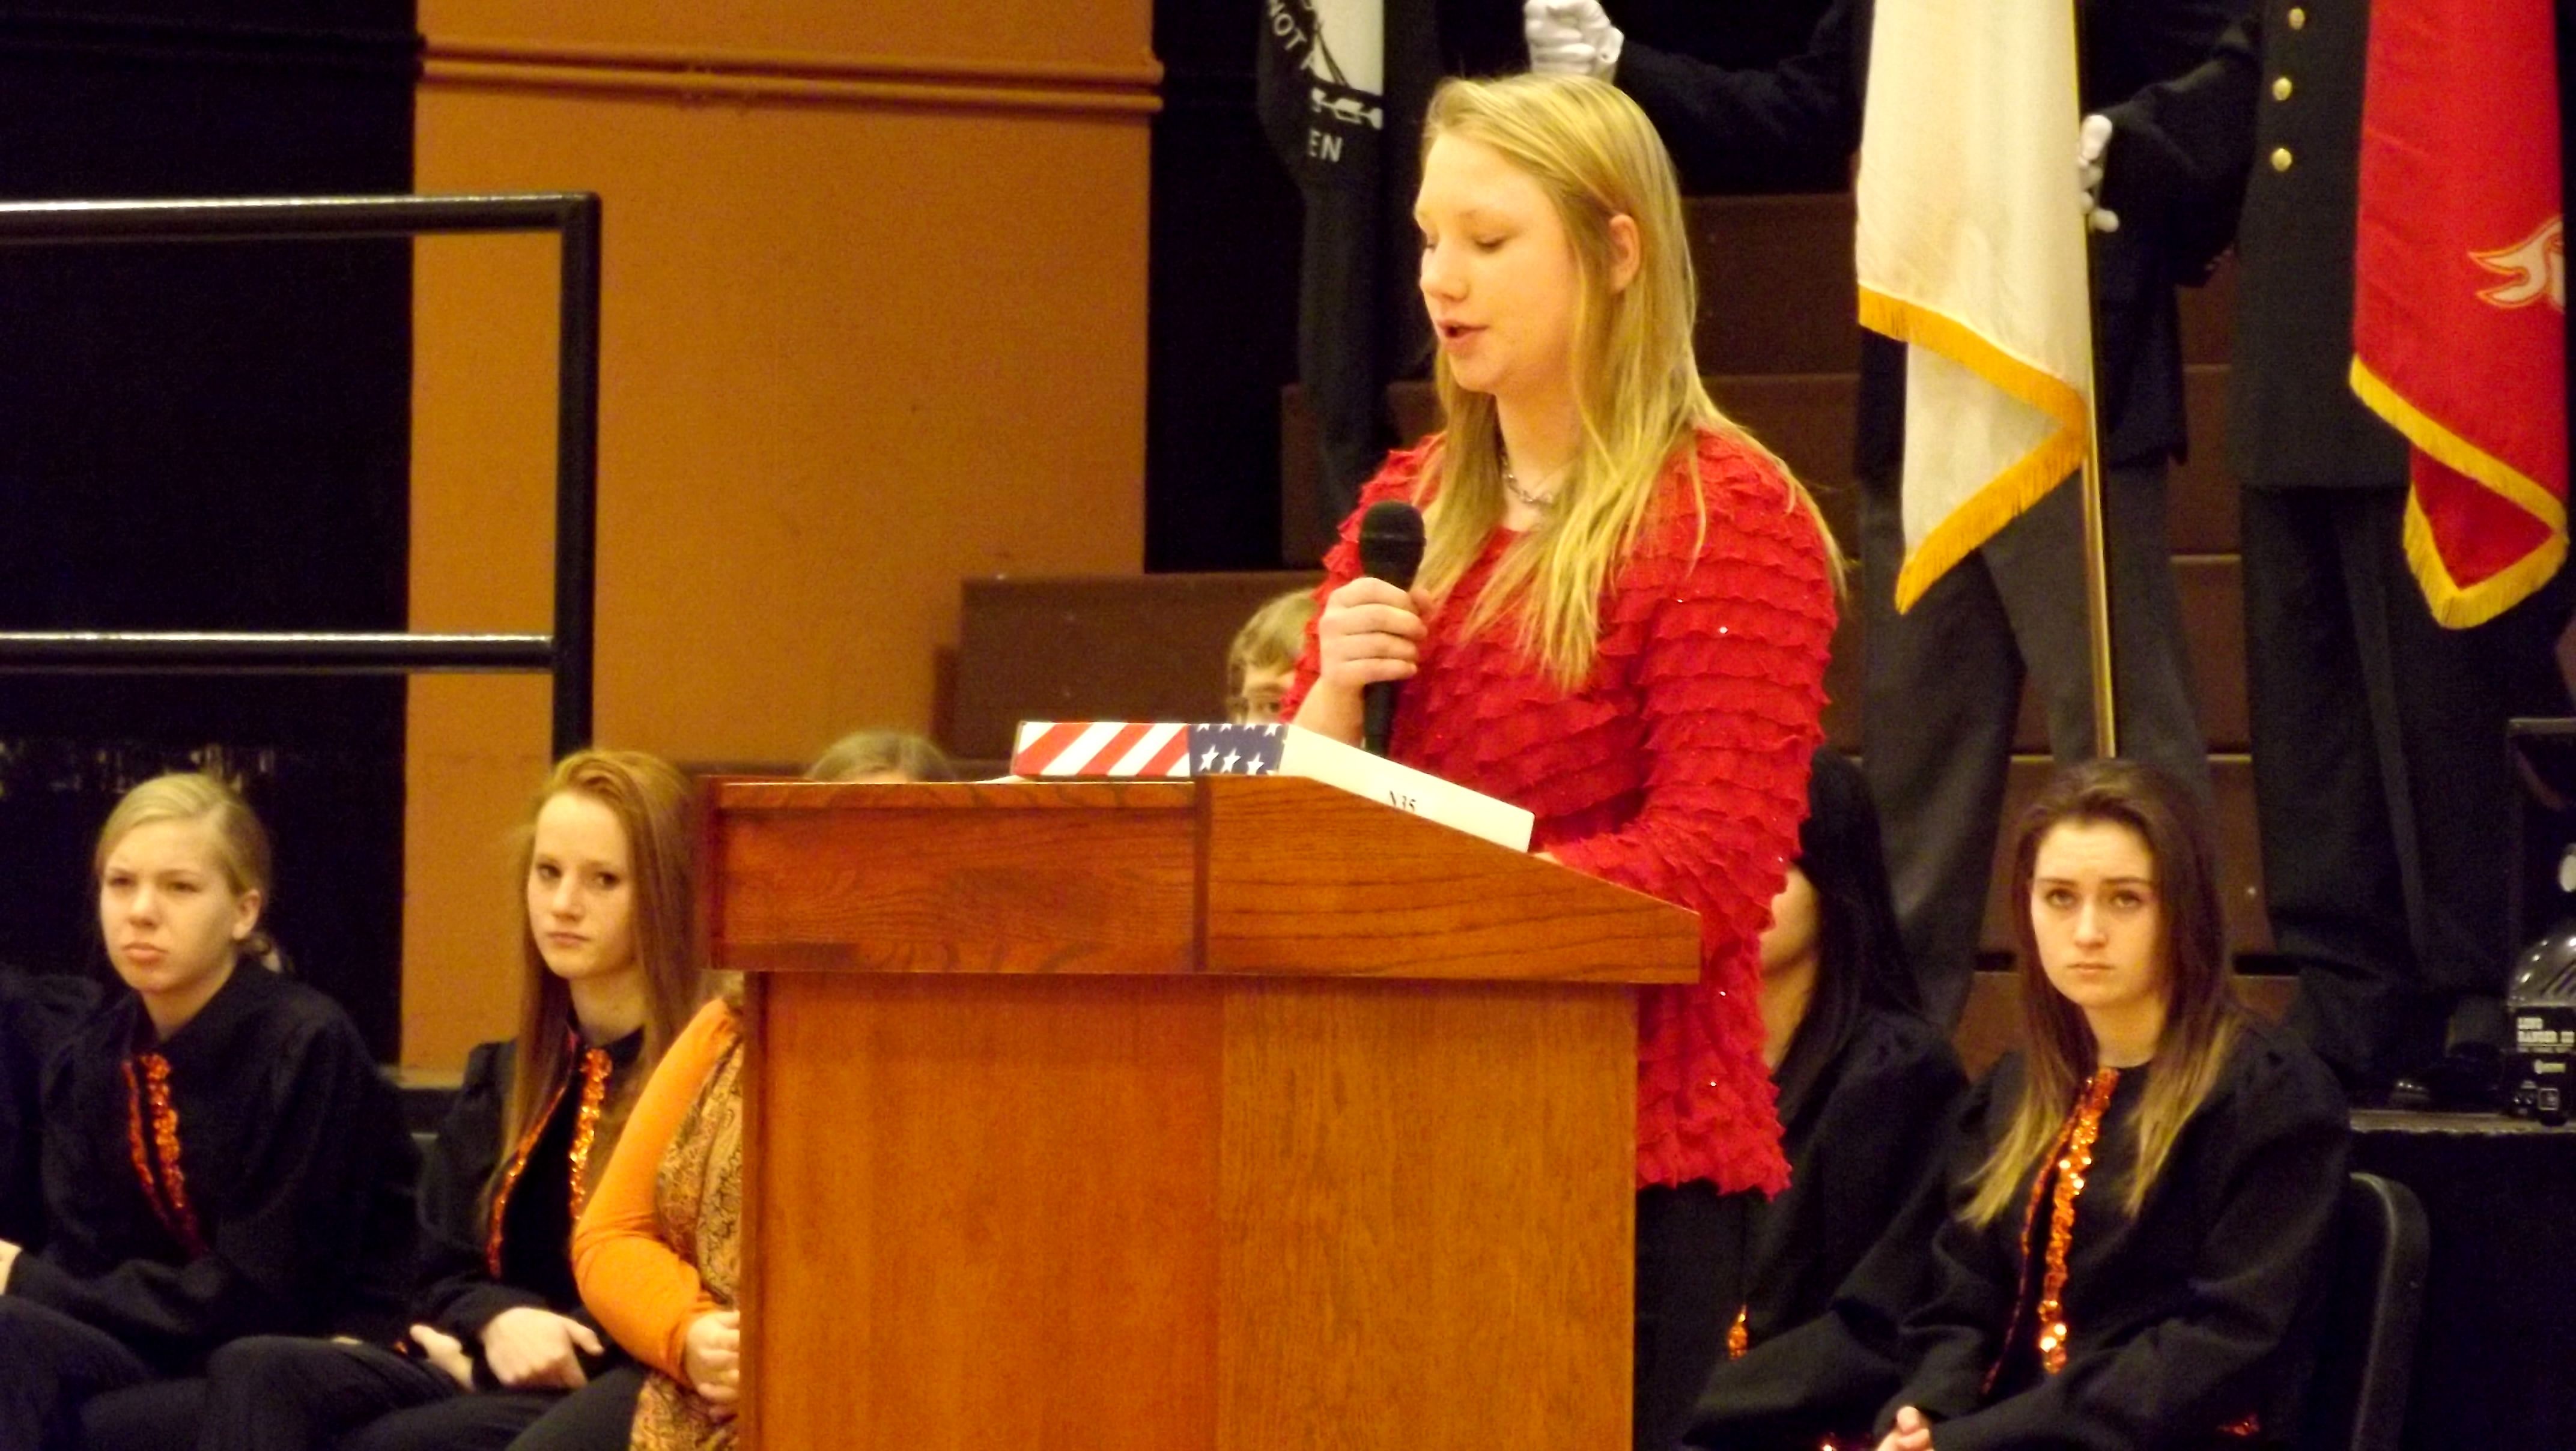 young woman in red sweater giving a speech at a podium